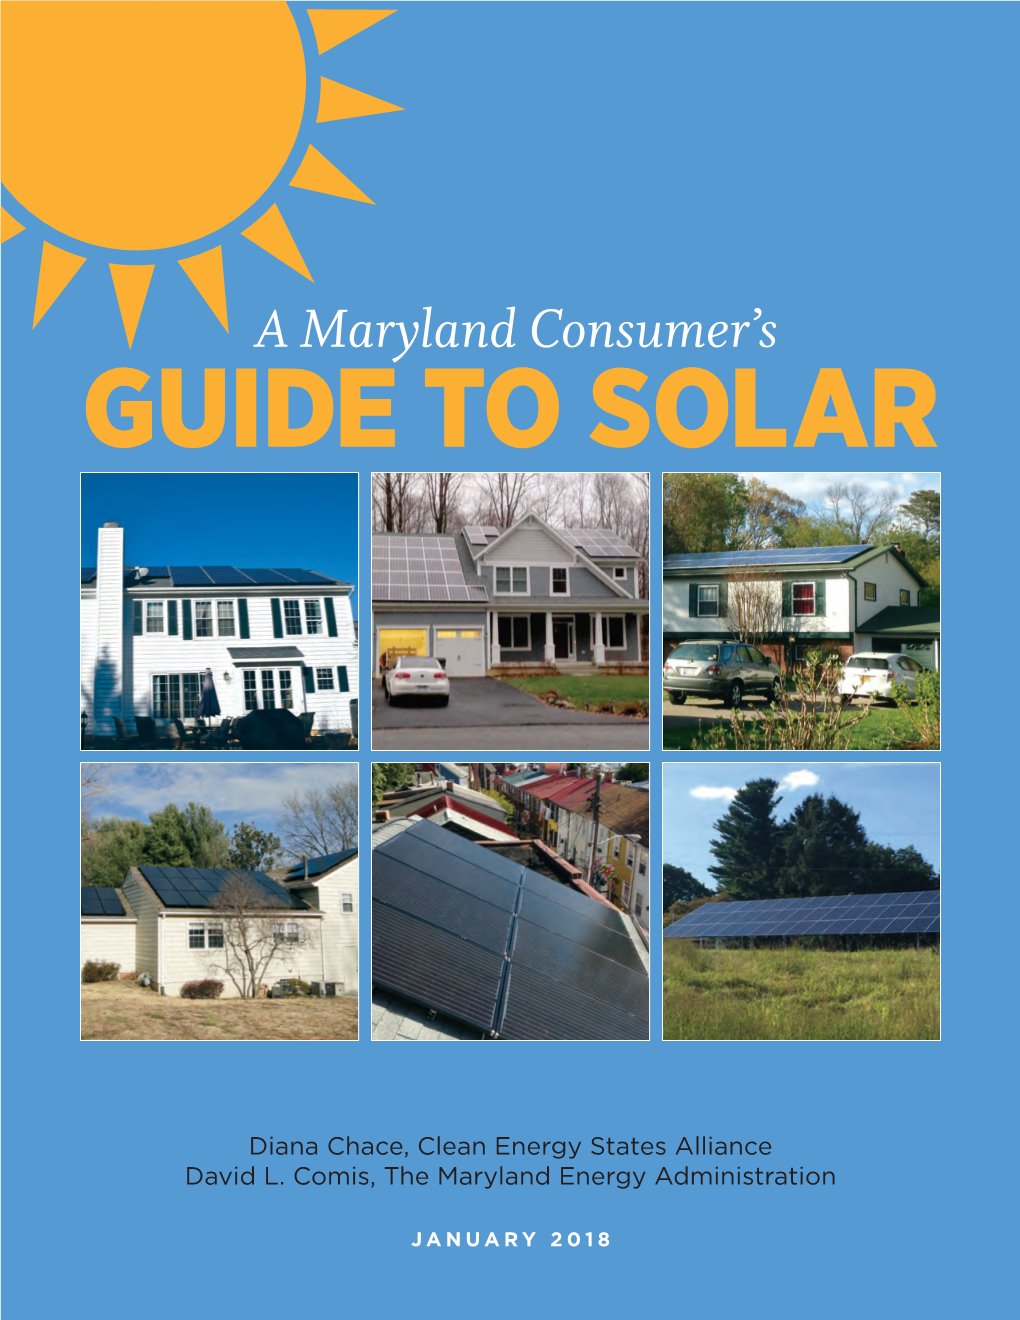 A Maryland Consumer's Guide to Solar